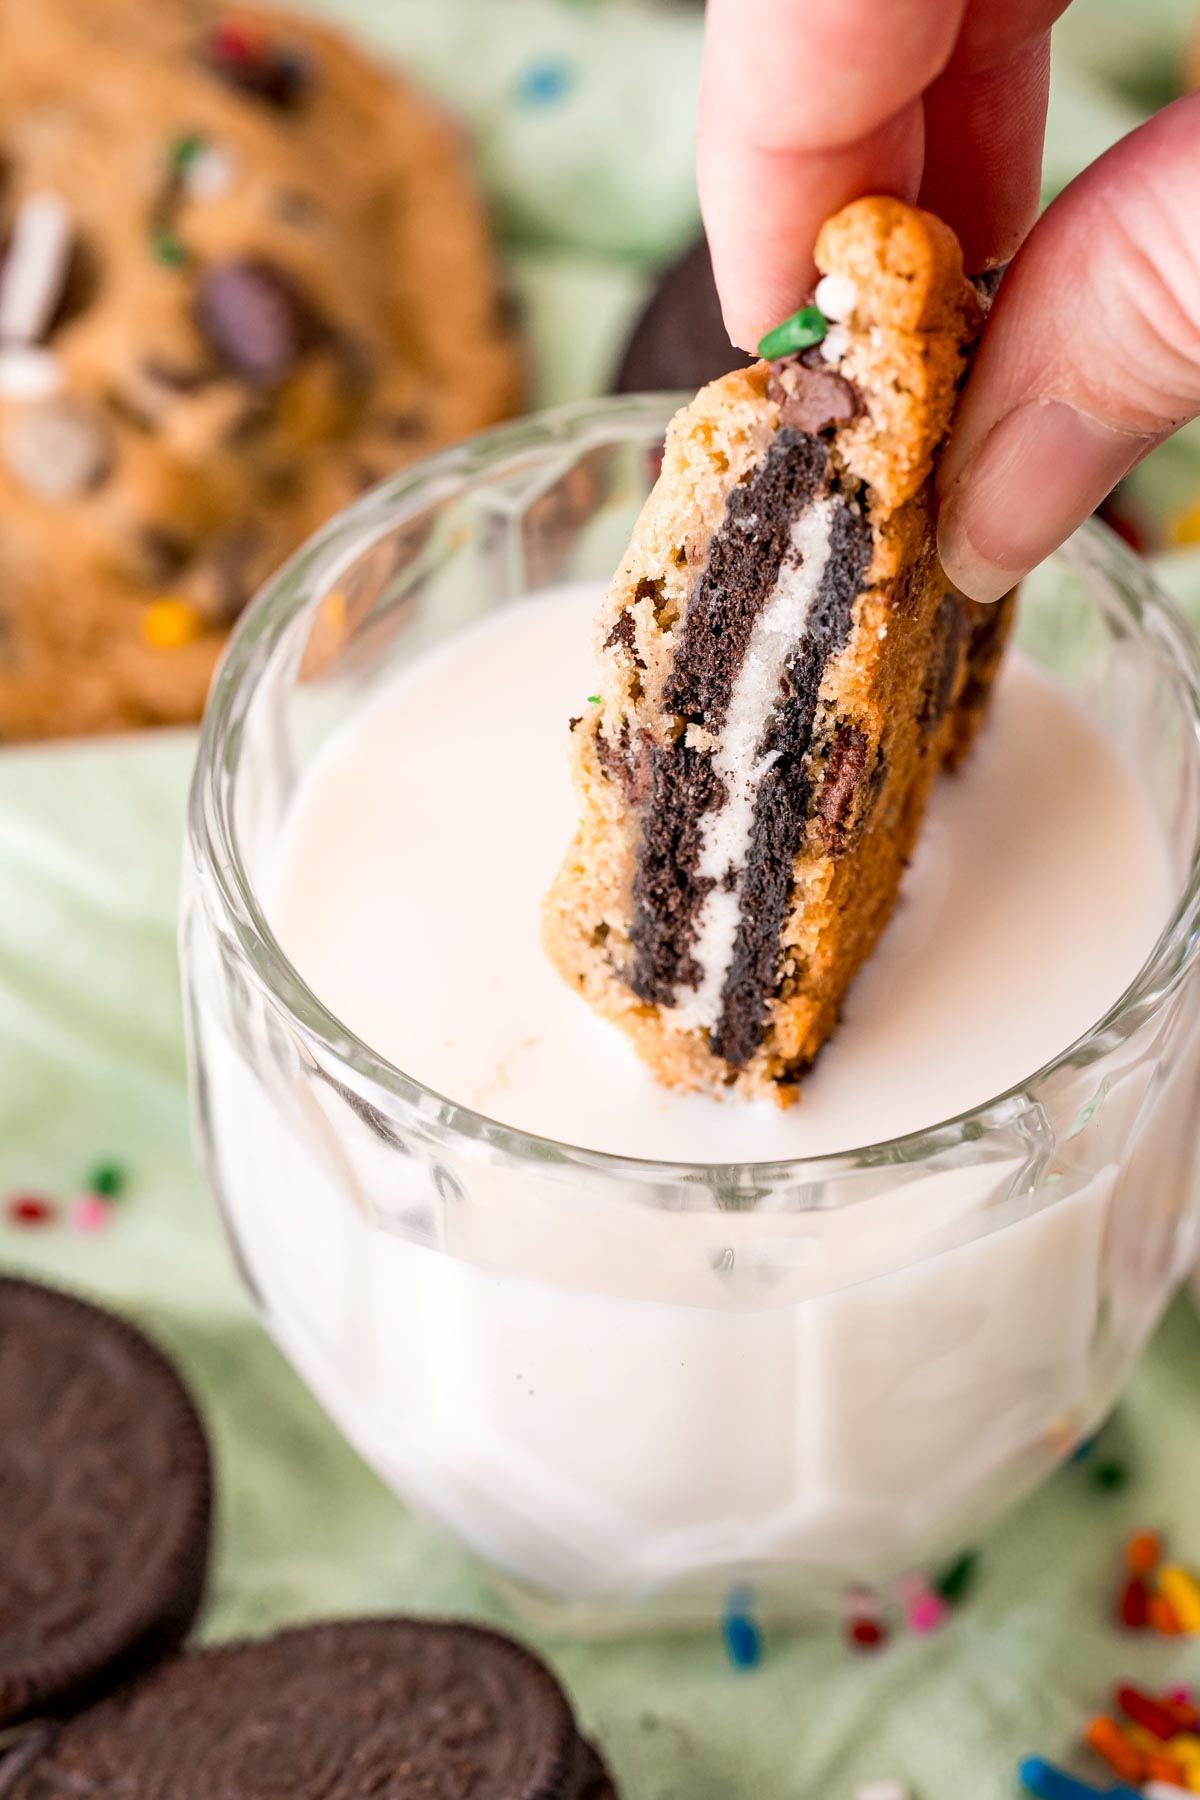 Oreo stuffed cookie being dunked in a glass of milk